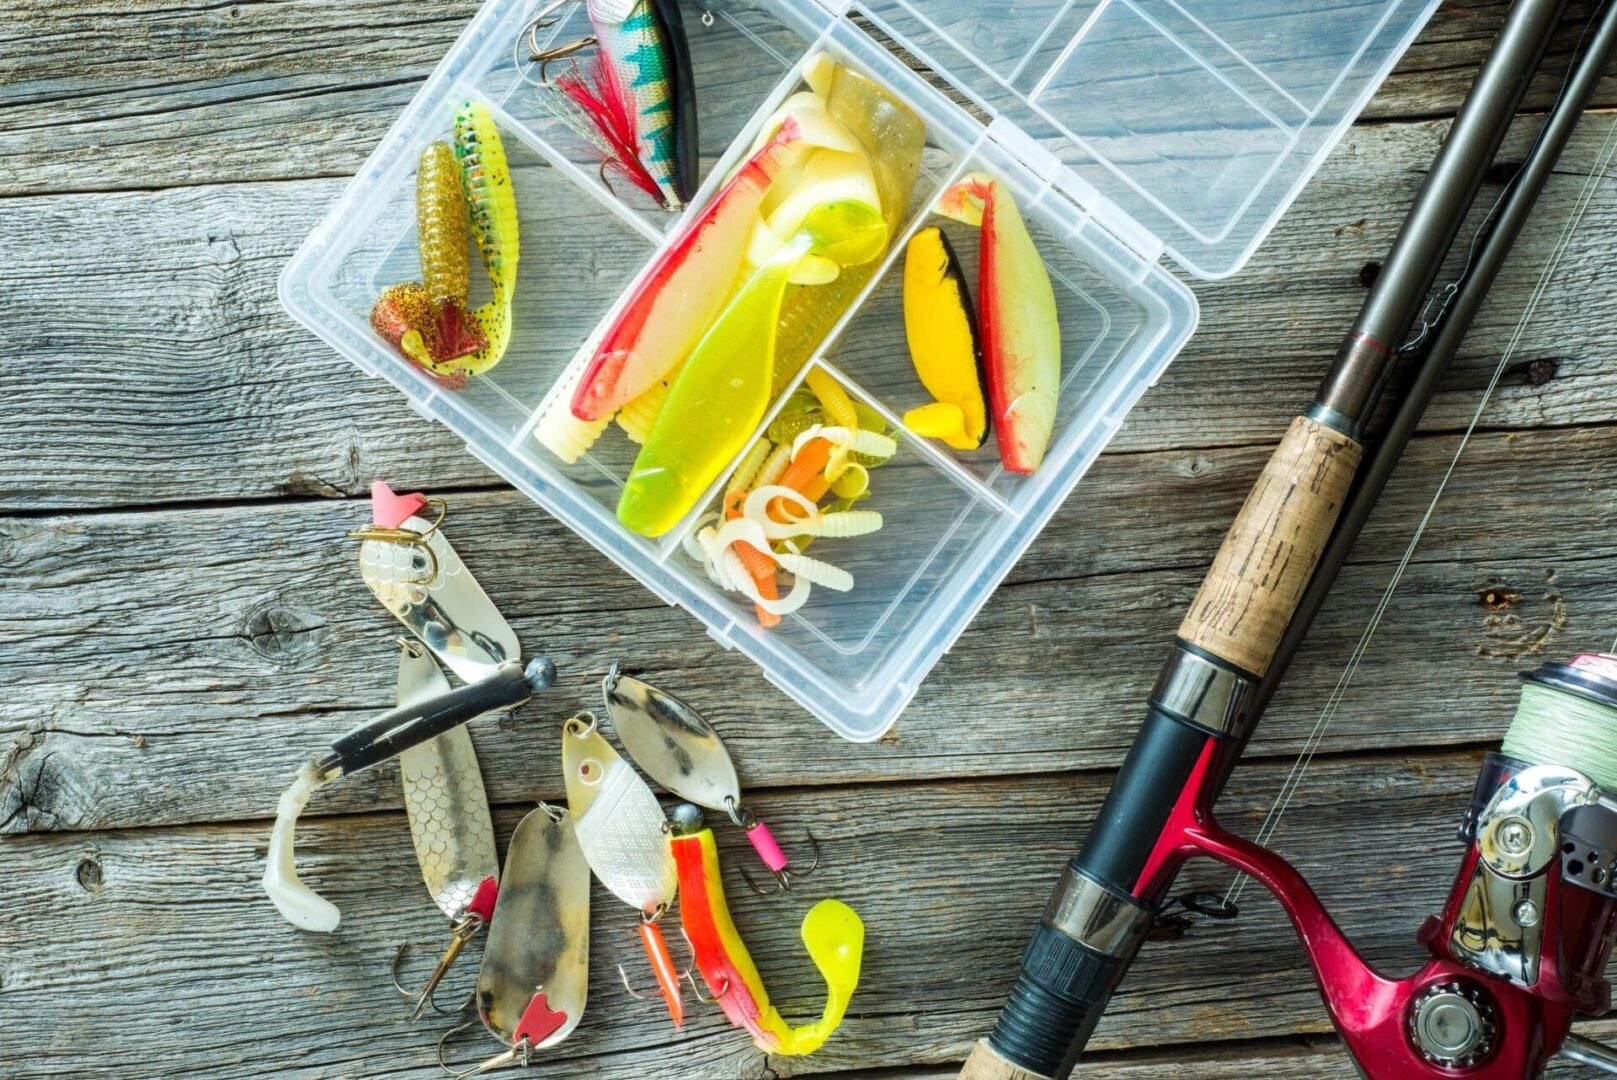 A box of fishing lures and a fishing rod.